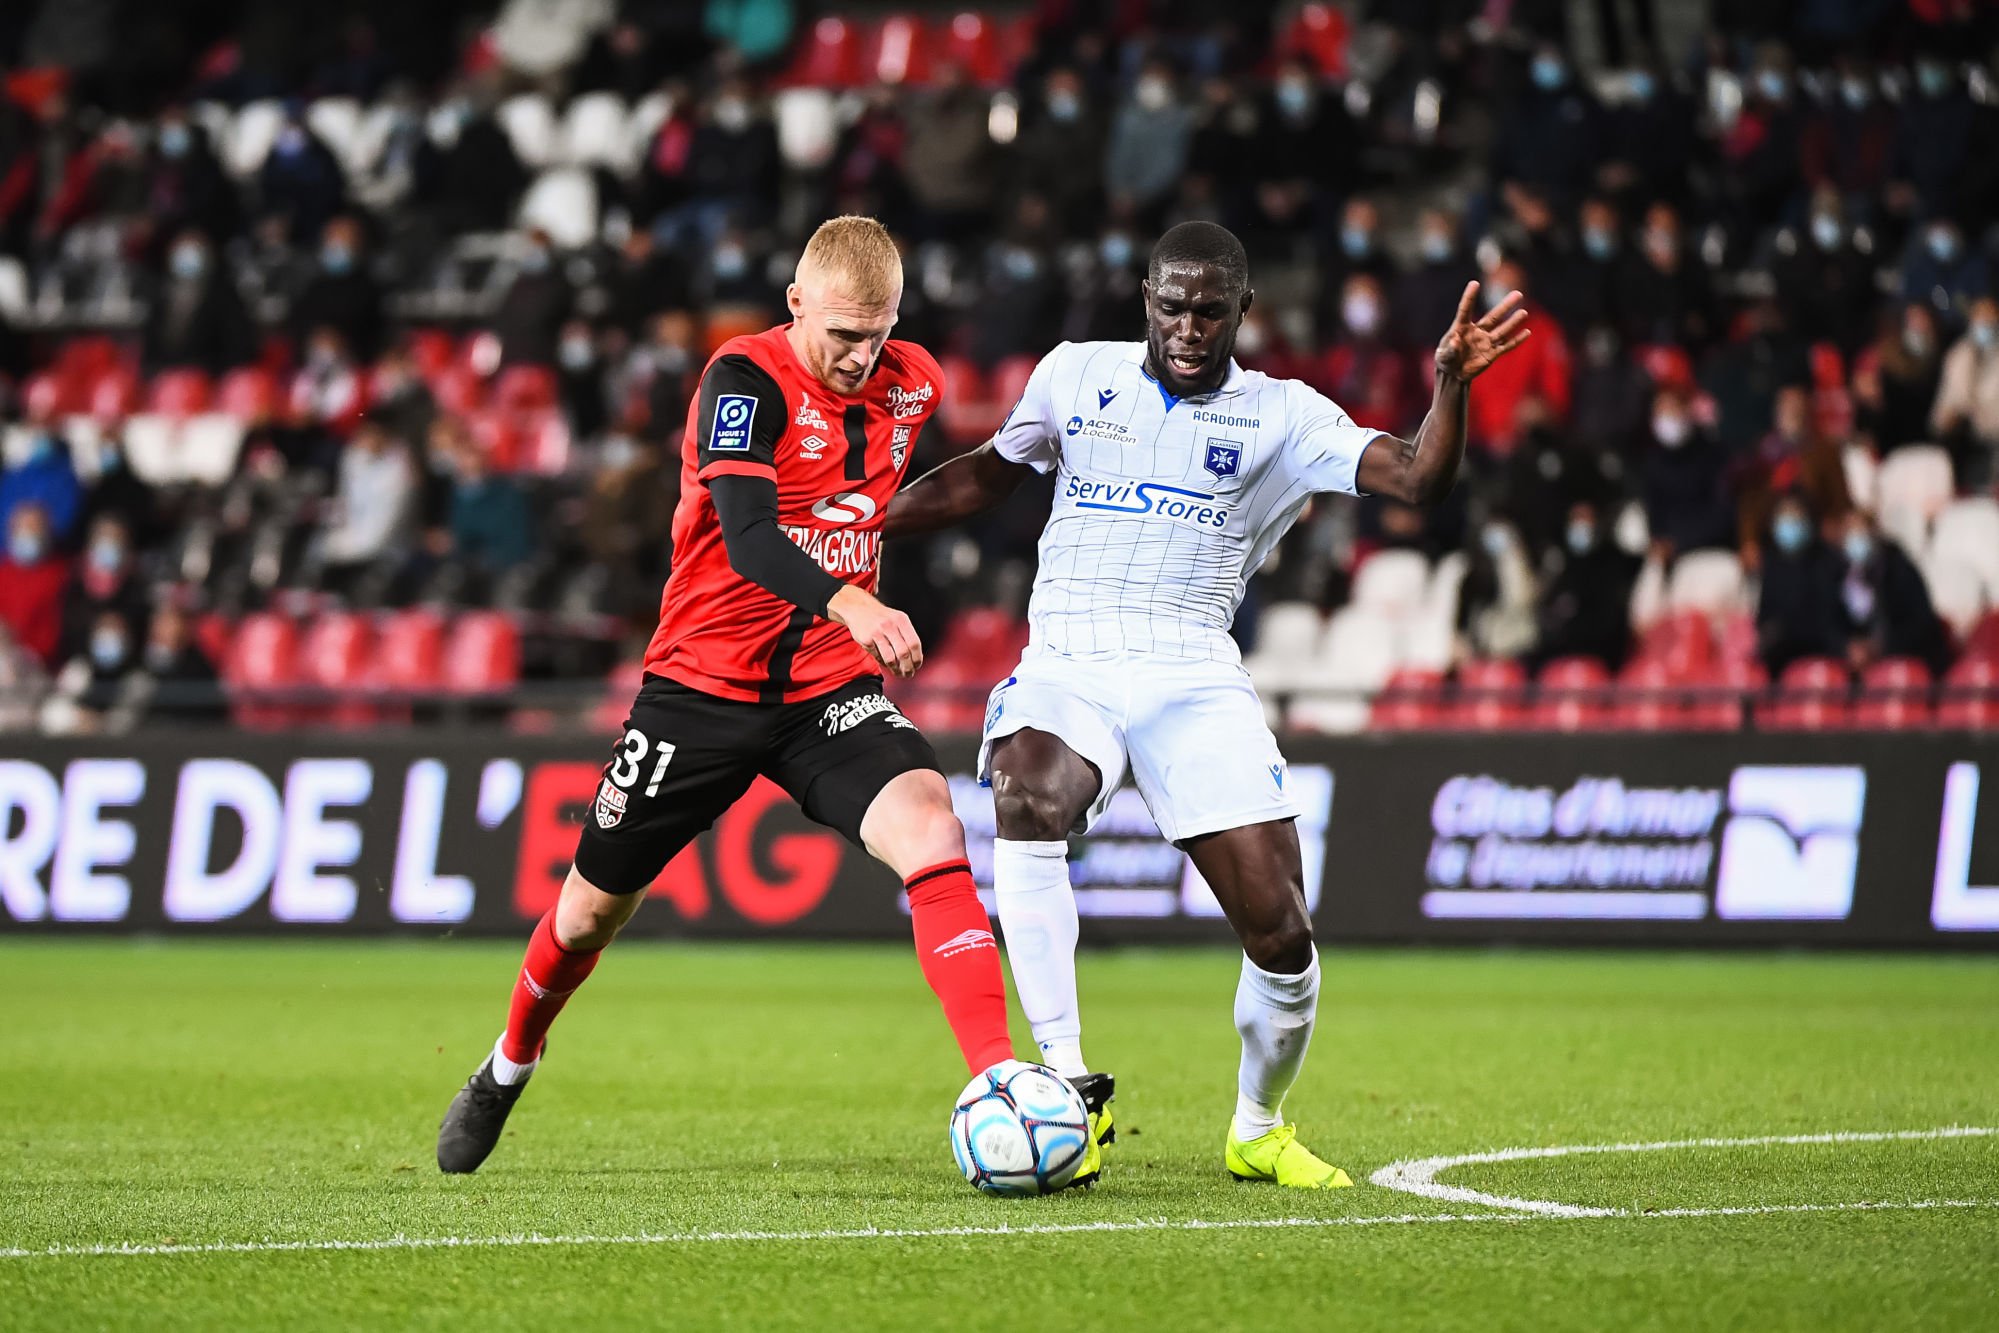 Gaetan ROBAIL of Guingamp and Carlens ARCUS of Auxerre Gaetan ROBAIL of Guingamp and Carlens ARCUS of Auxerre during the French Ligue 2 BKT soccer match between Guingamp and Auxerre at Stade du Roudourou on October 19, 2020 in Guingamp, France. (Photo by Baptiste Fernandez/Icon Sport) - Stade de Roudourou - Guingamp (France)